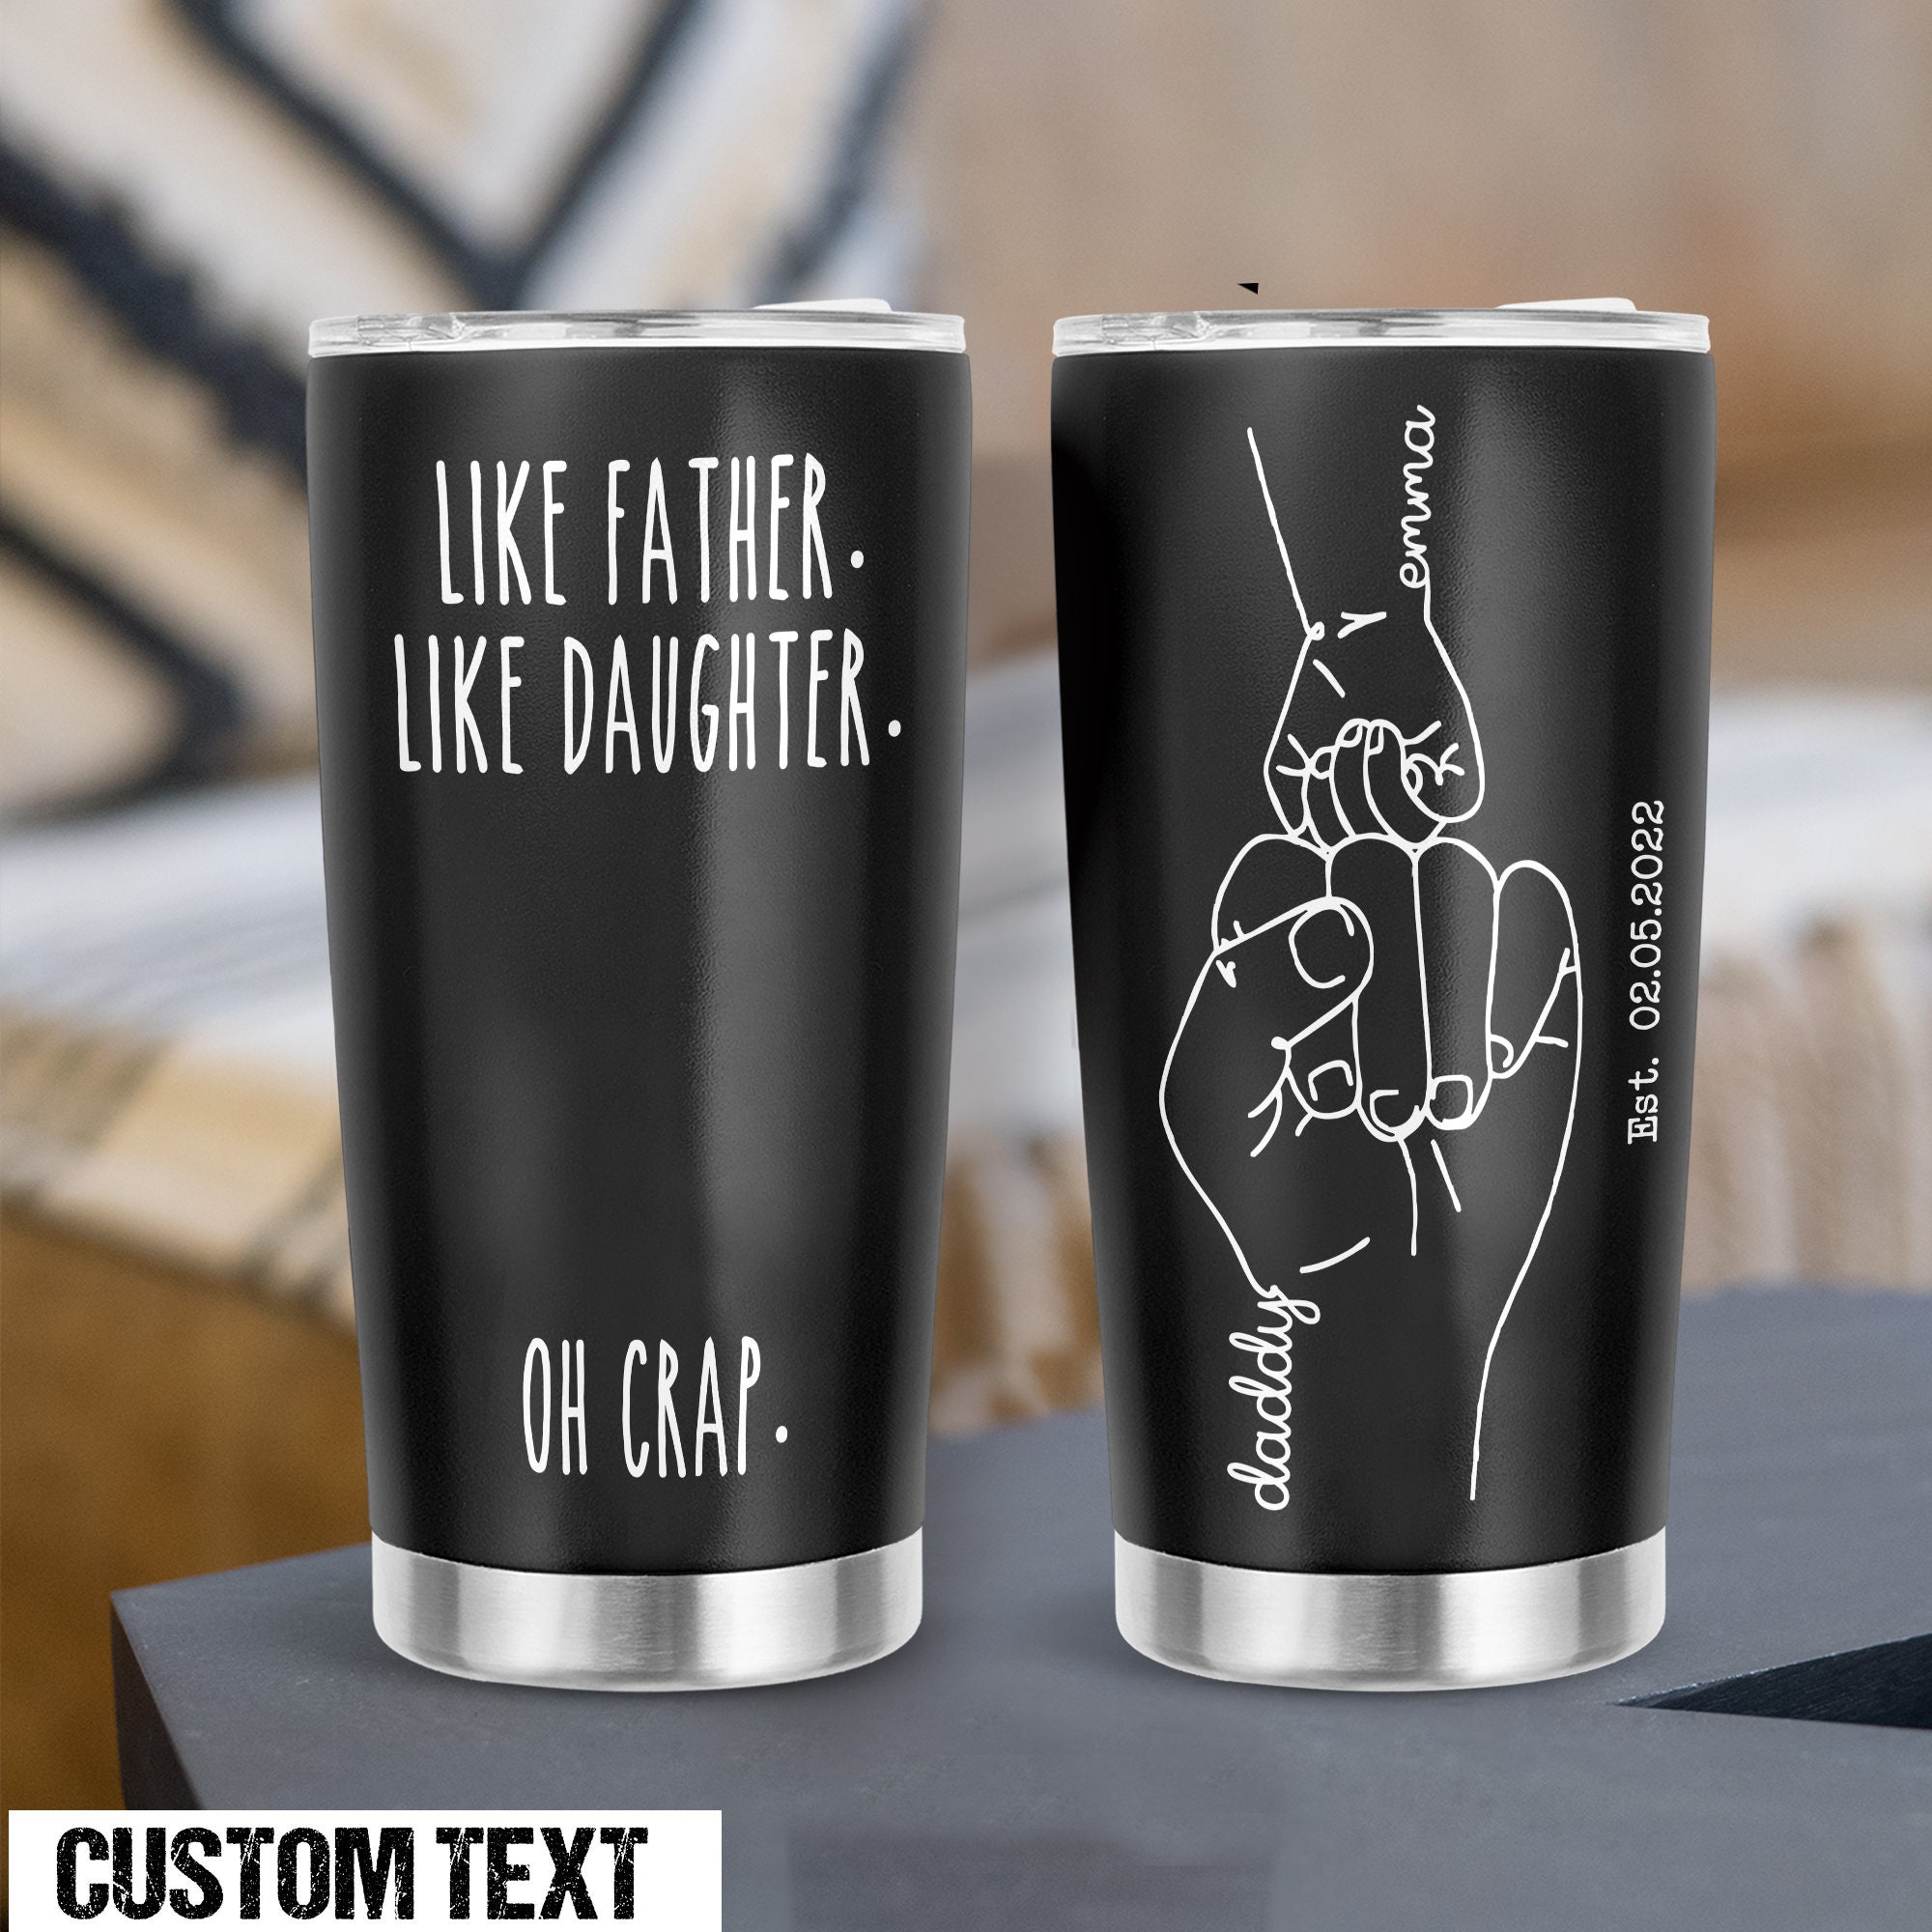 Limited Edition Mostly Original Parts Custom Tumbler Gifts